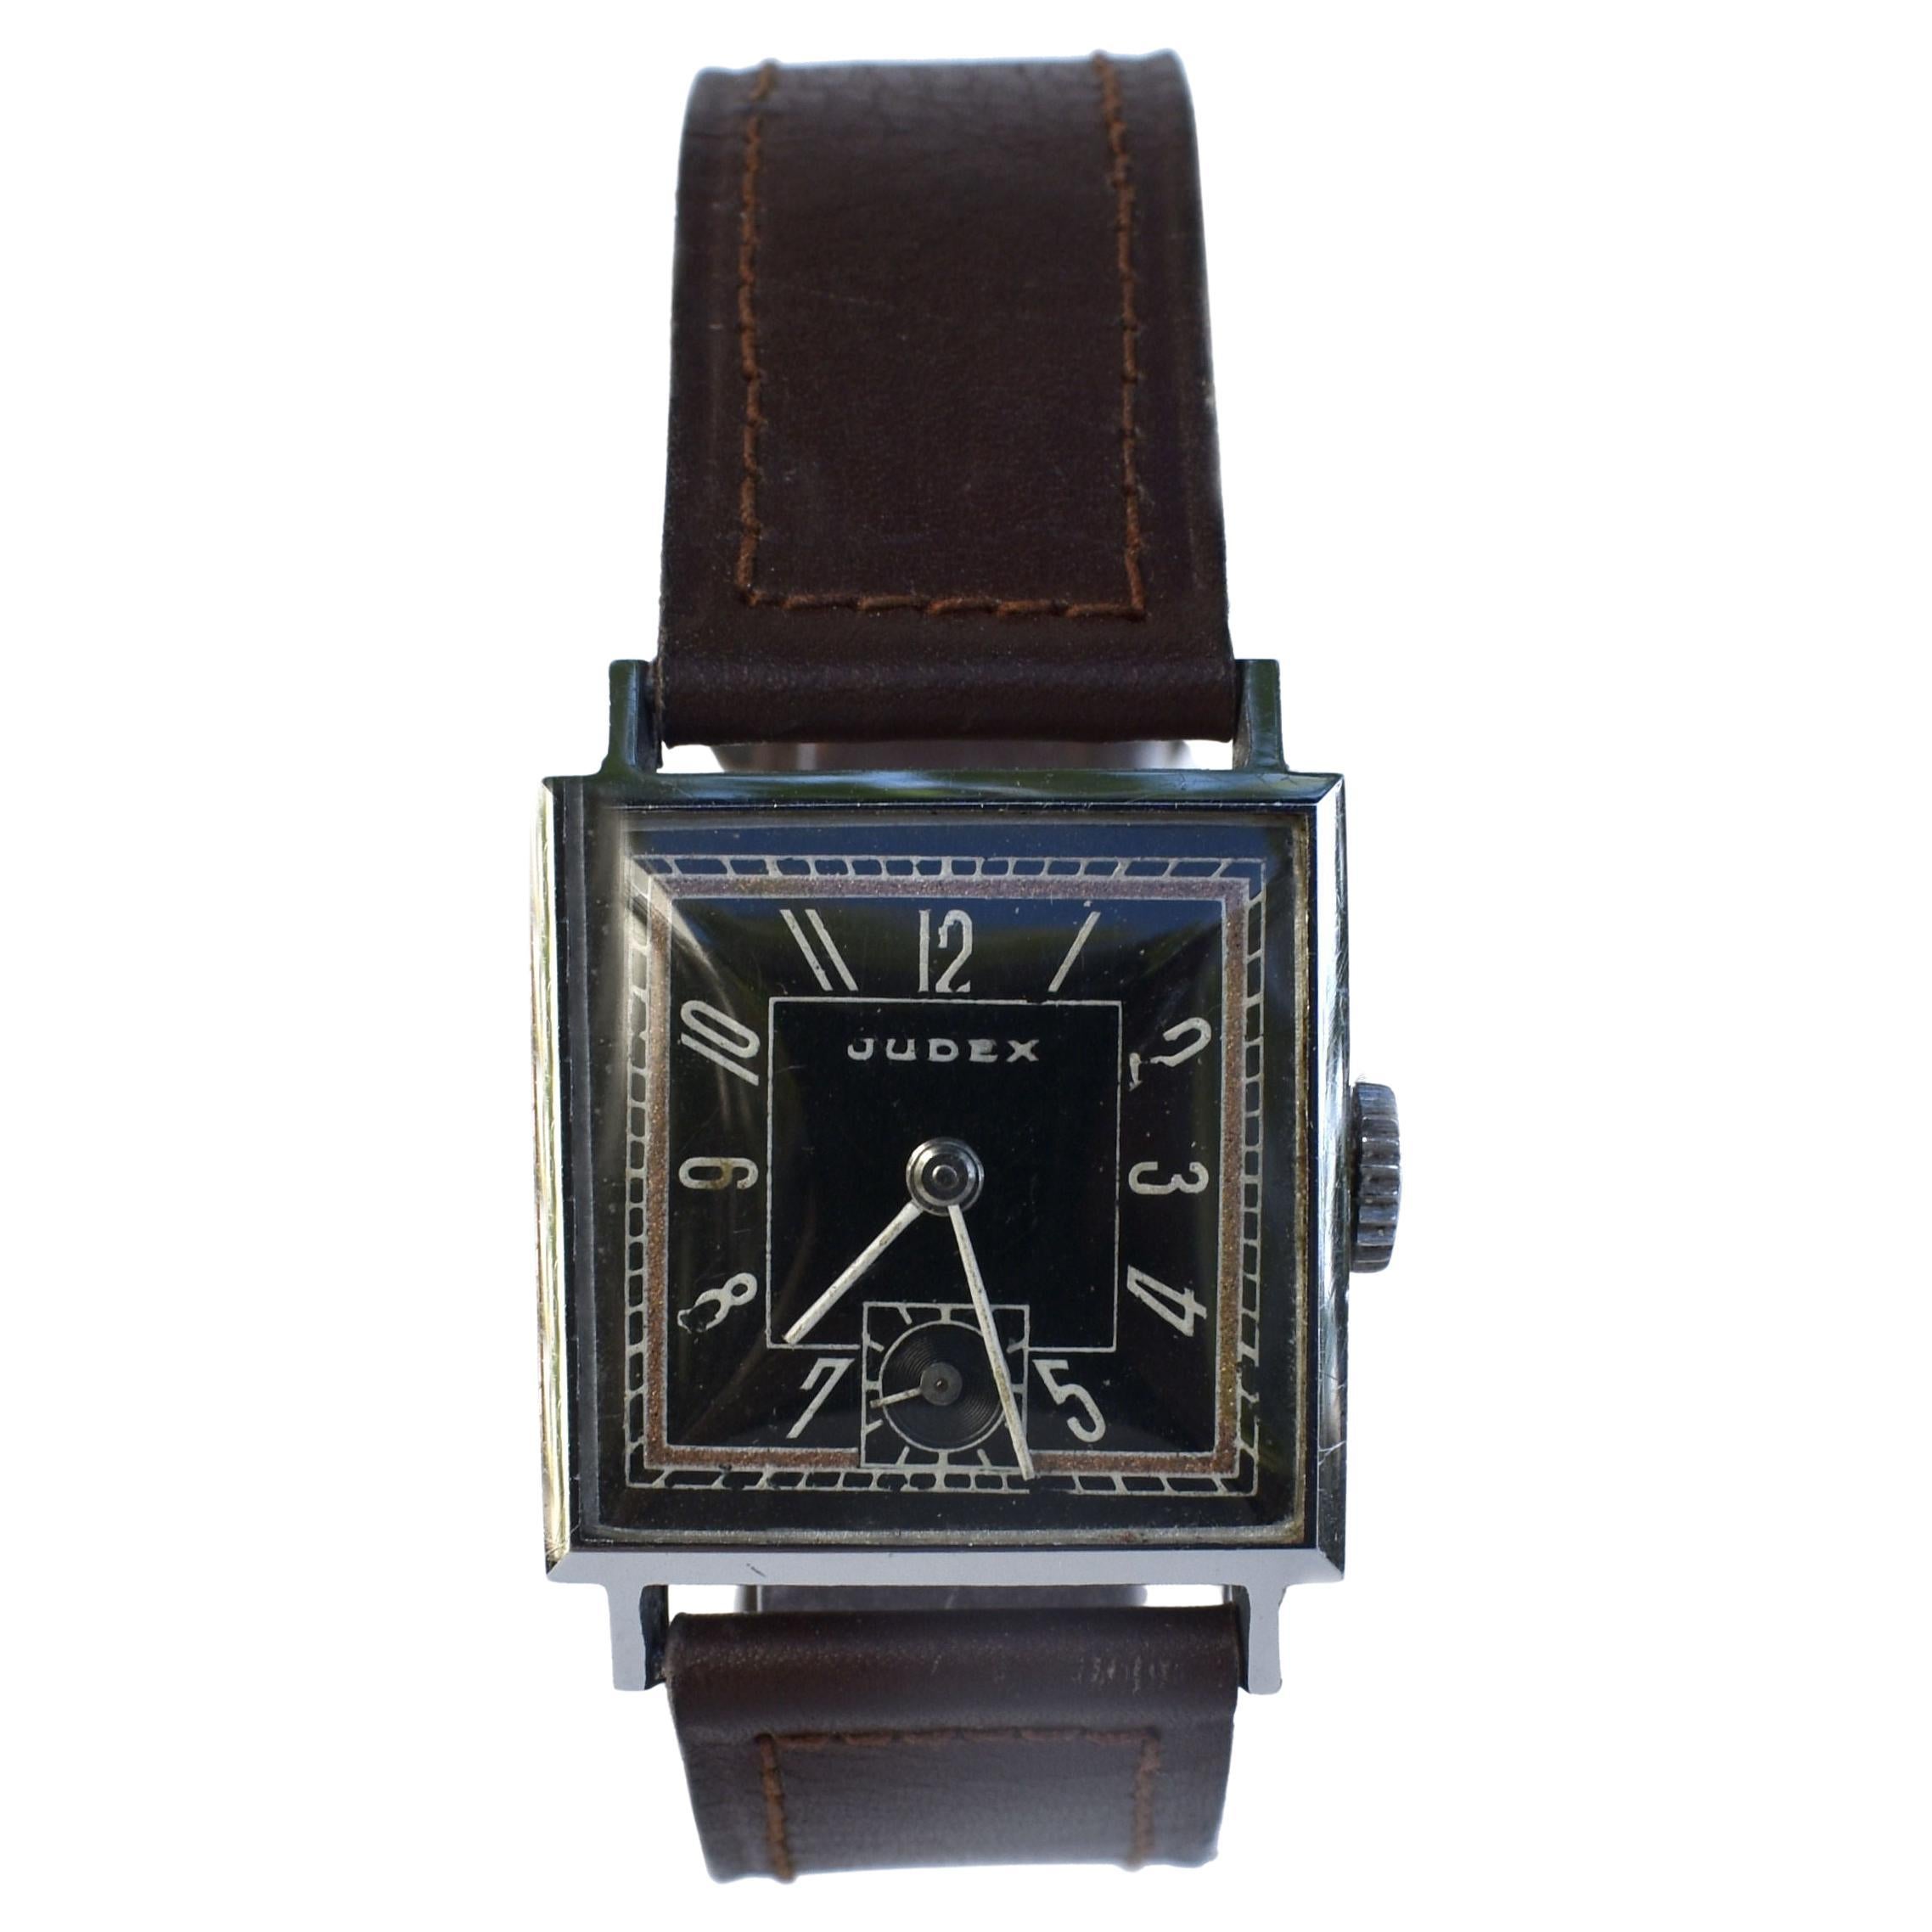 Art Deco Gents Manual Wristwatch by French Watchmakers Judex, c1930